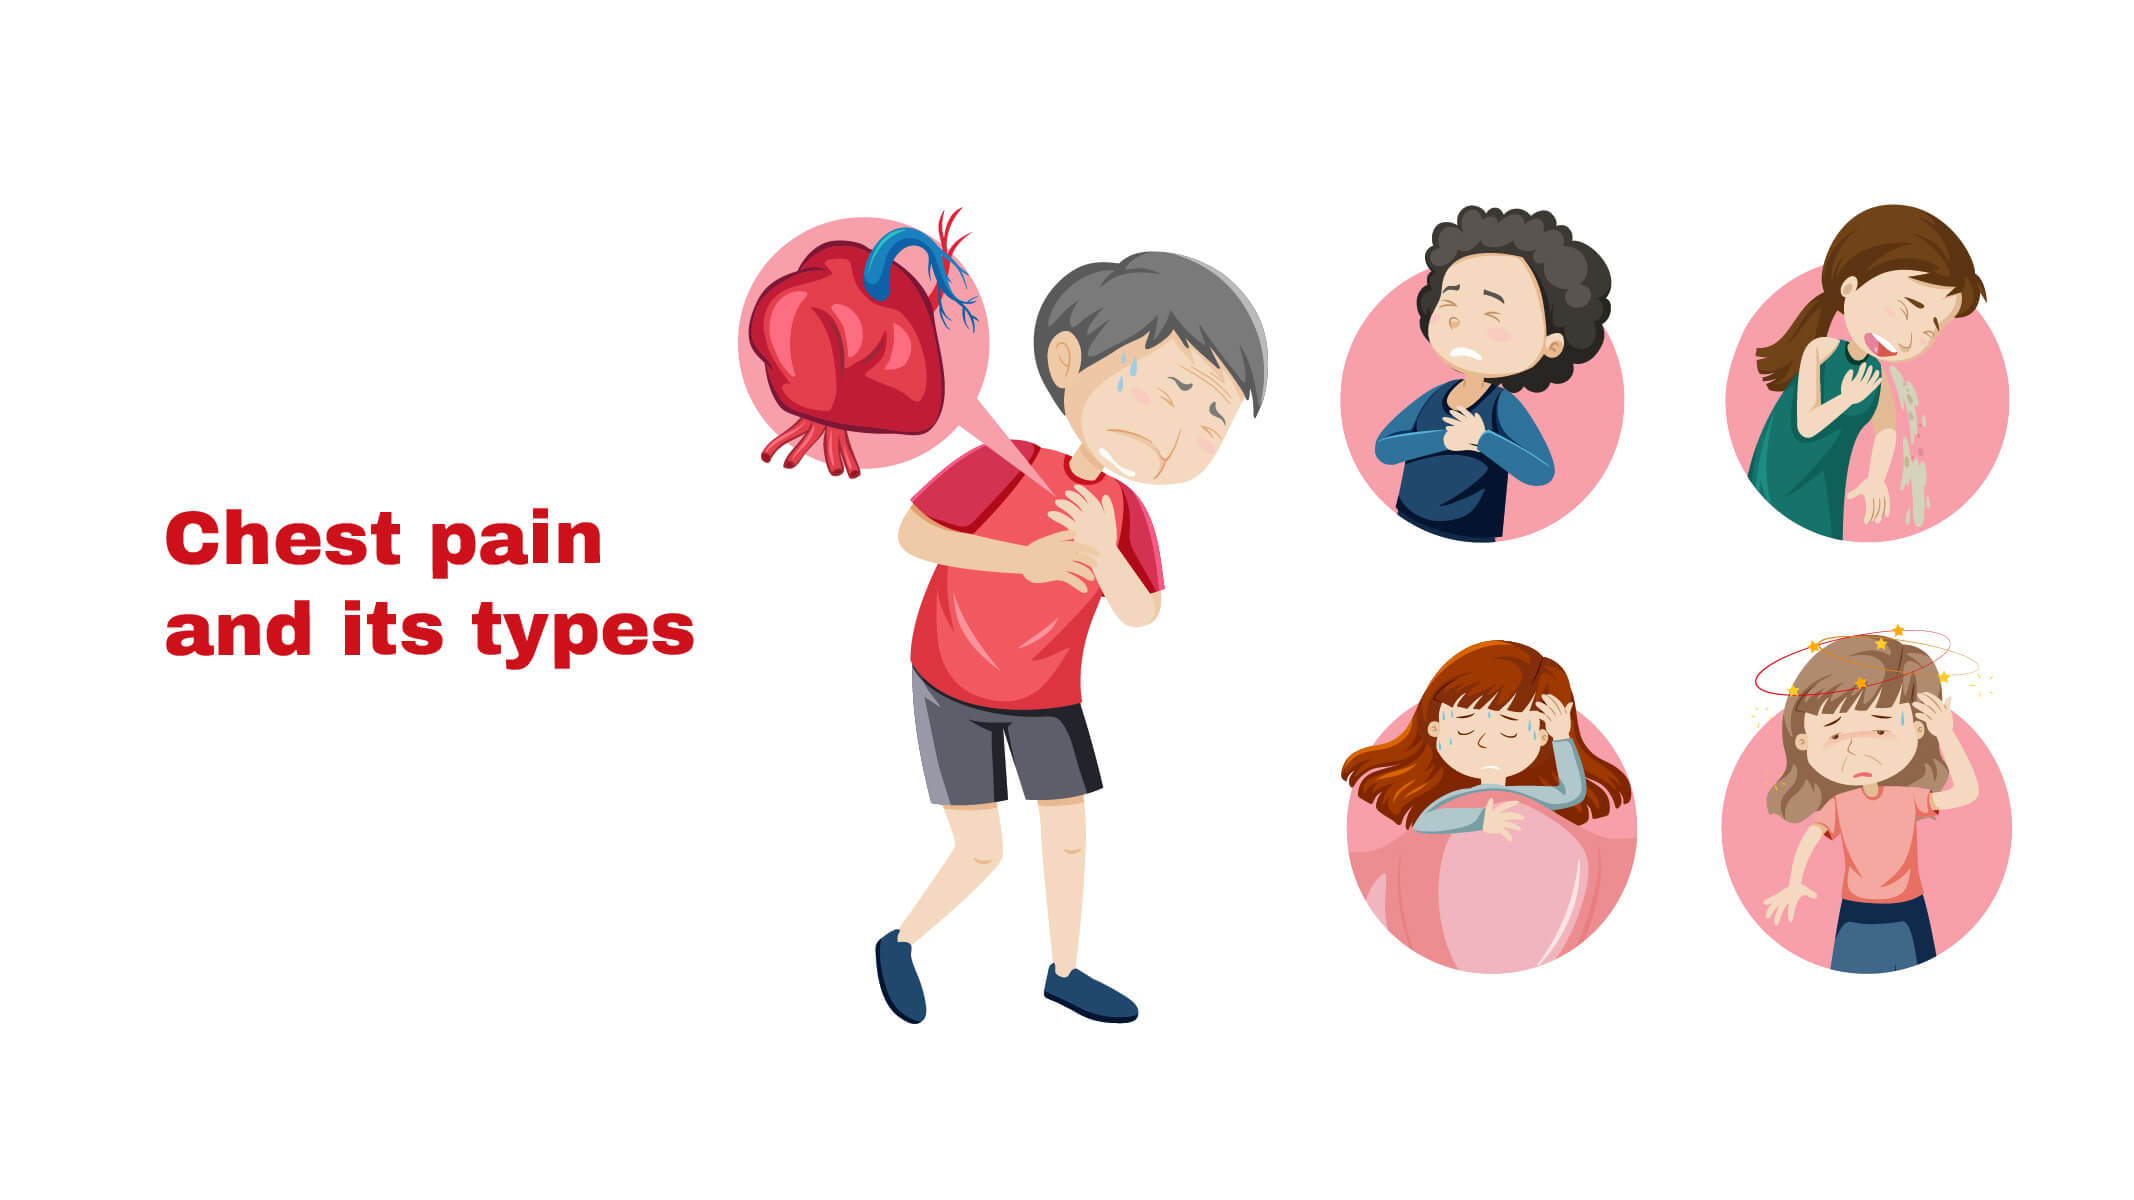 Chest pain and its types